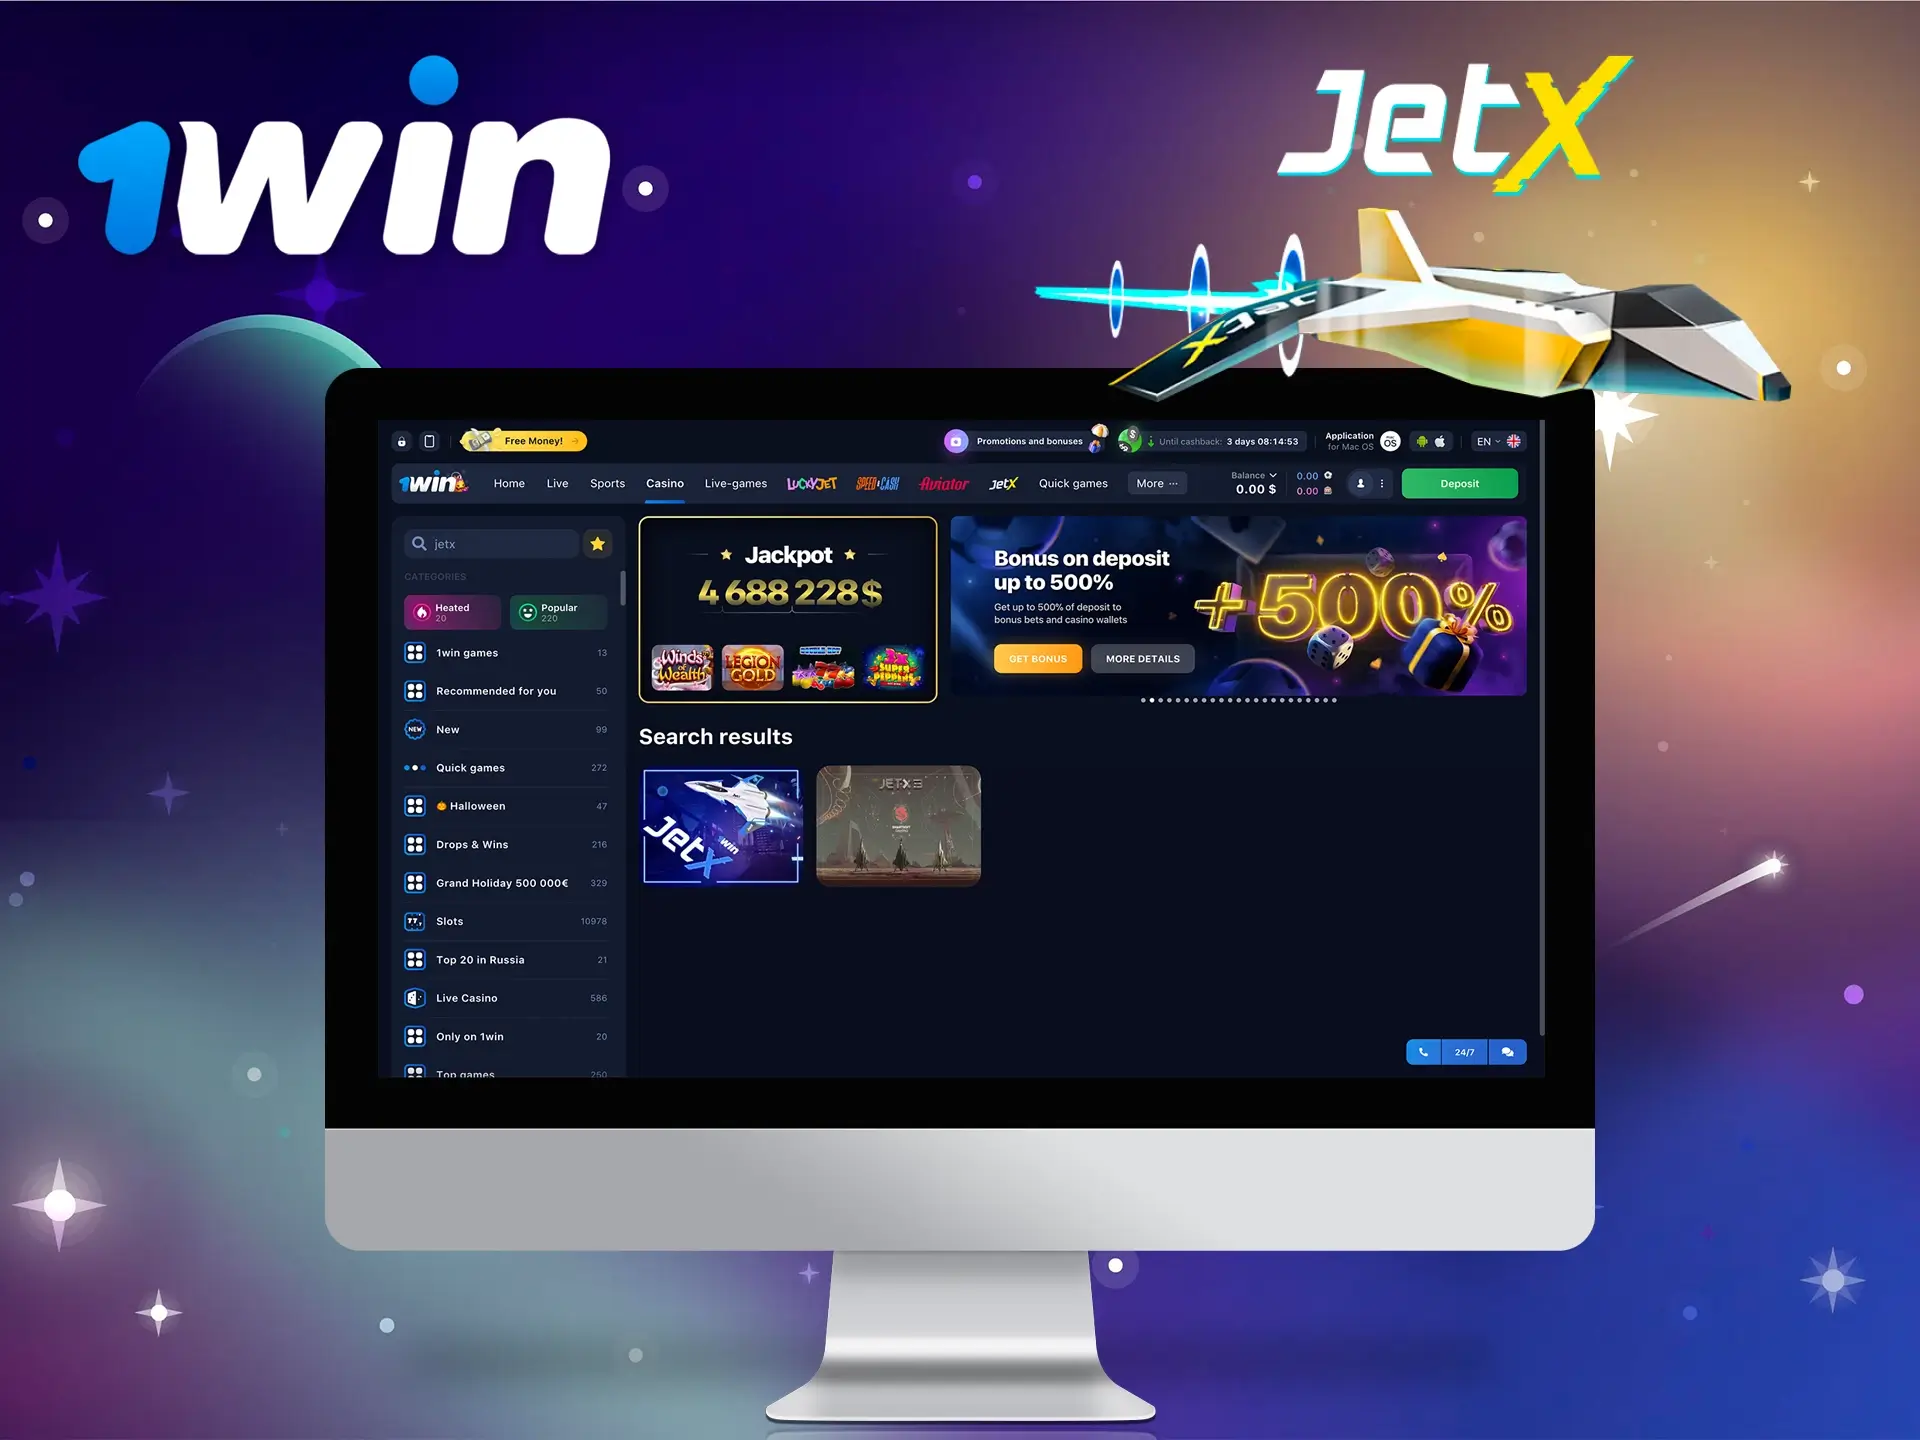 Be sure to try the demo mode and enhance your personal level and experience at Jetx.